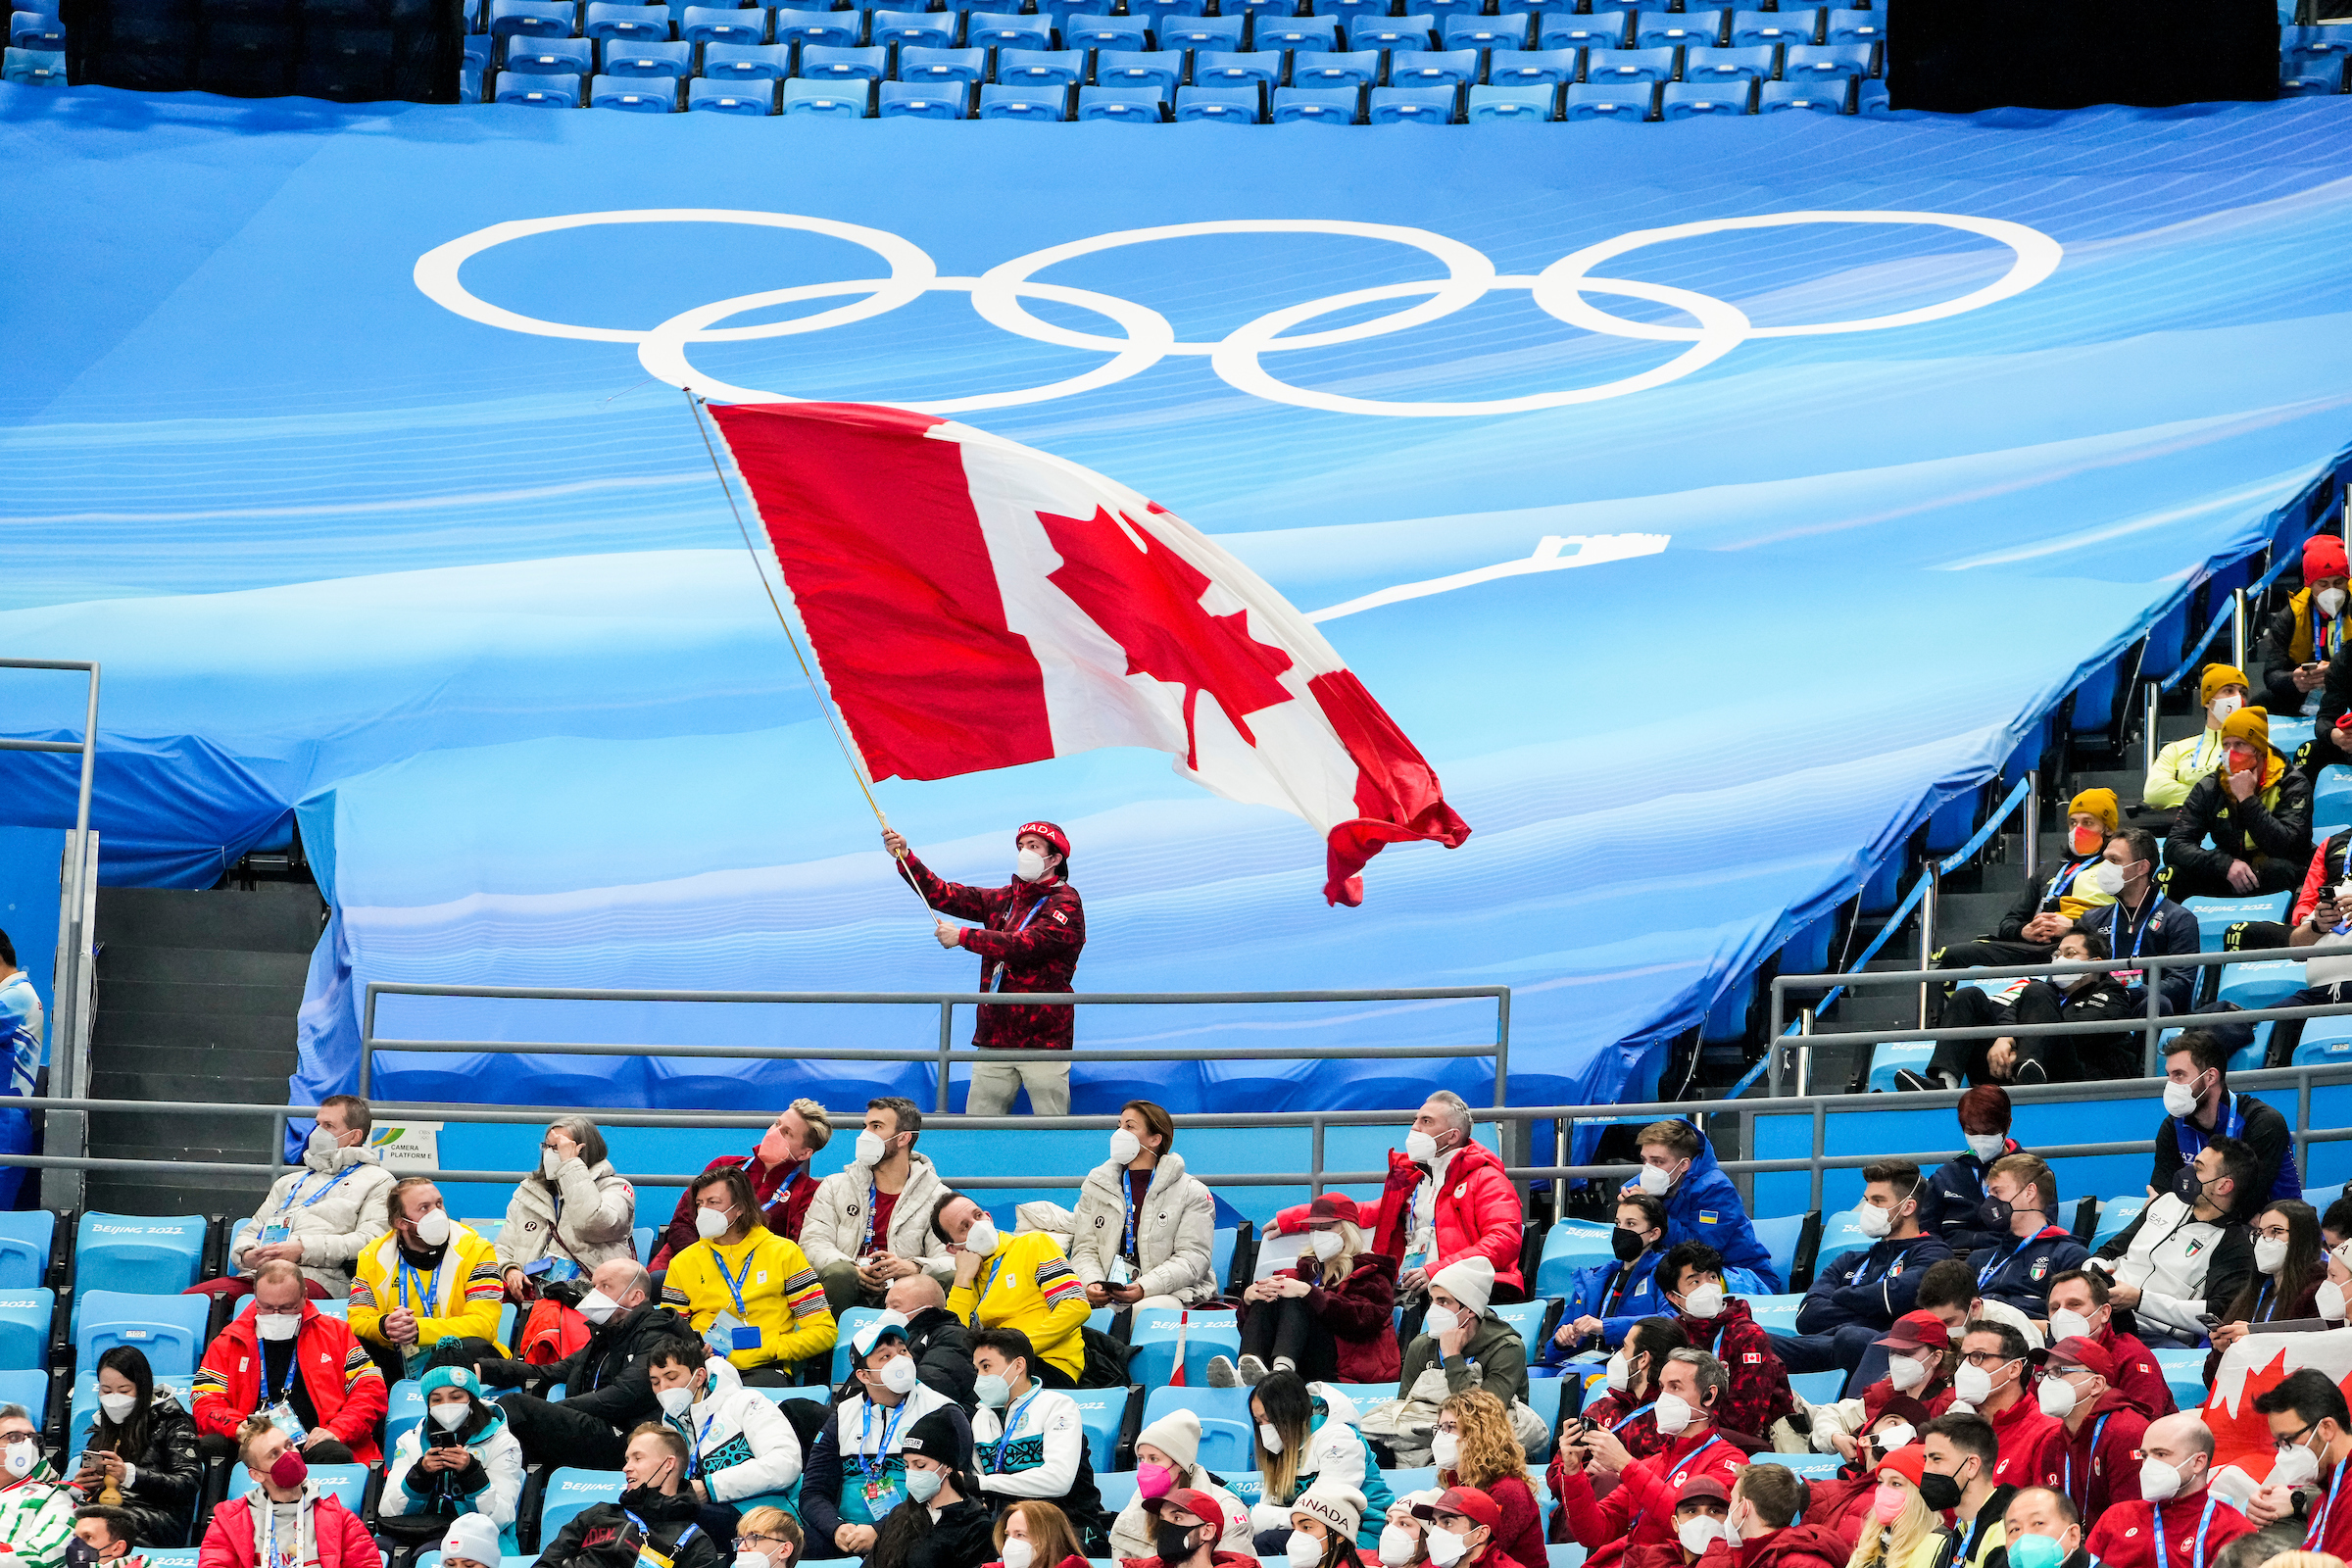 Keegan Messing waves a giant Canadian flag in the stands